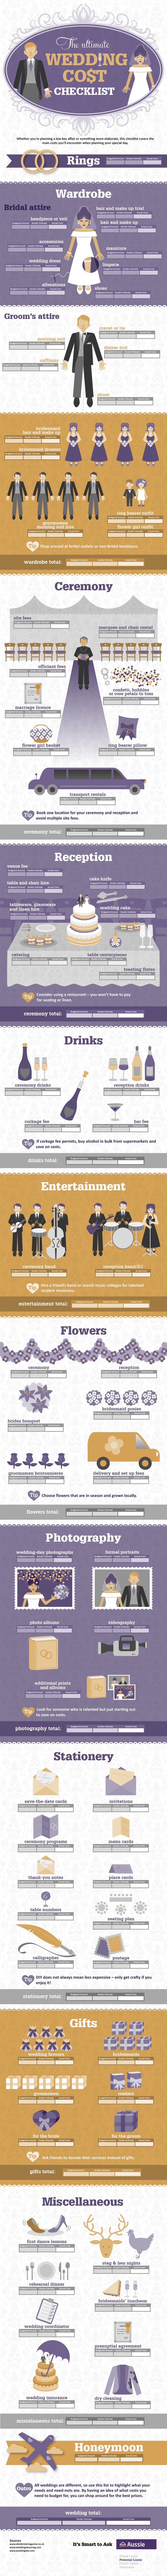 The Ultimate Wedding Cost Checklist